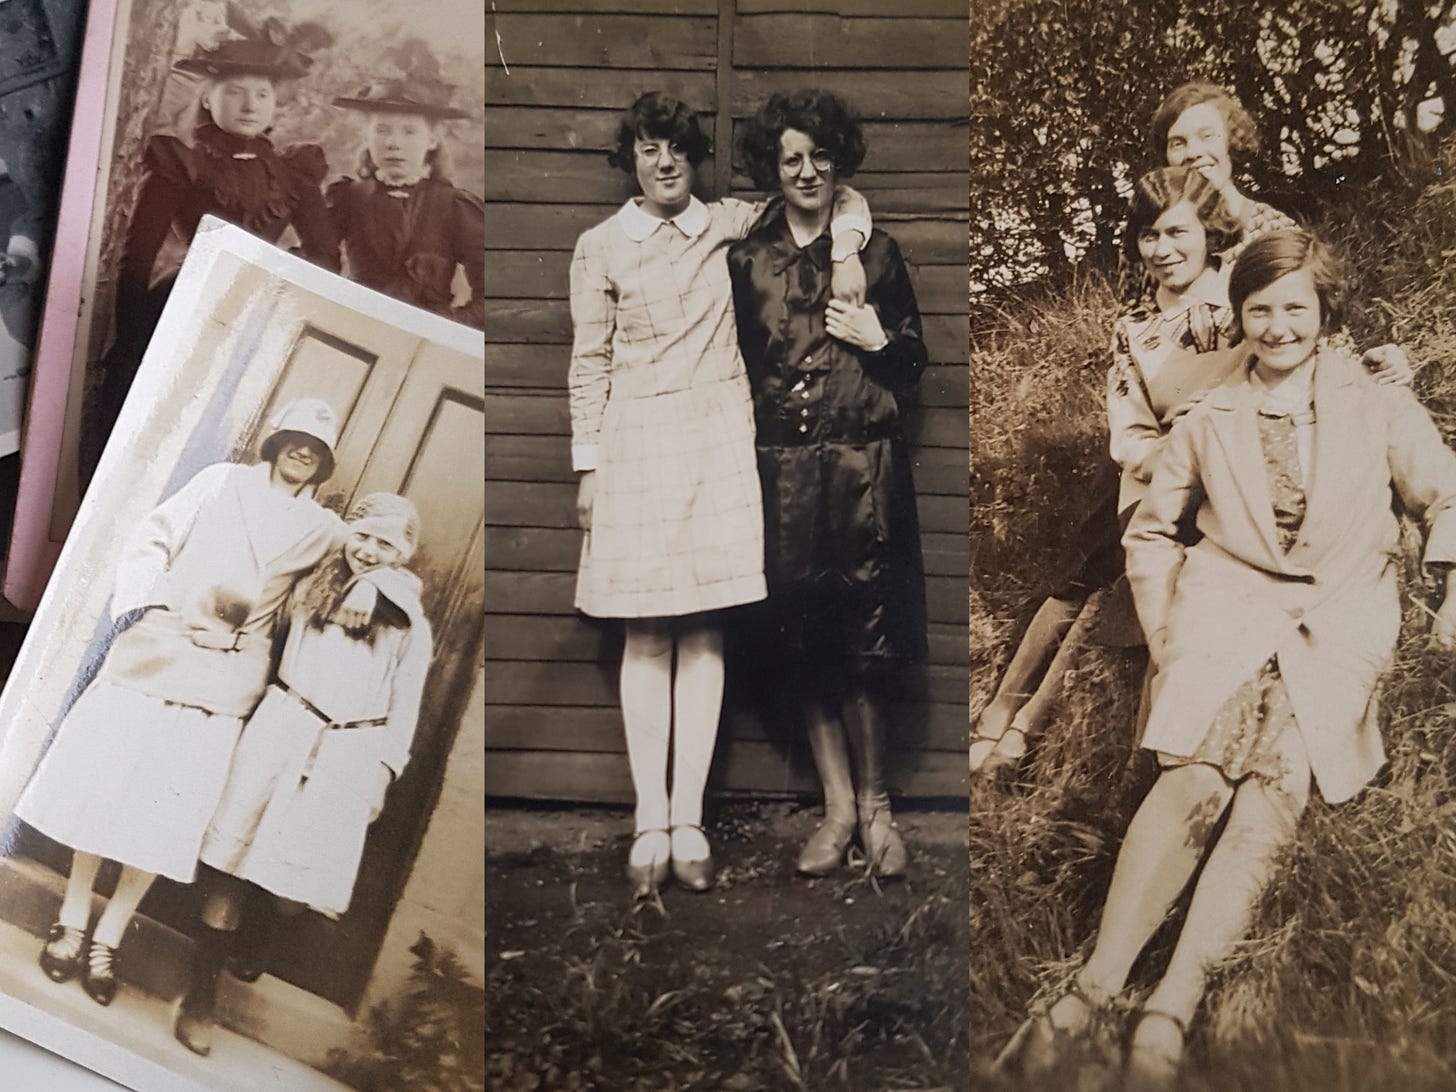 A photo collage of old family photos from the early 20th century